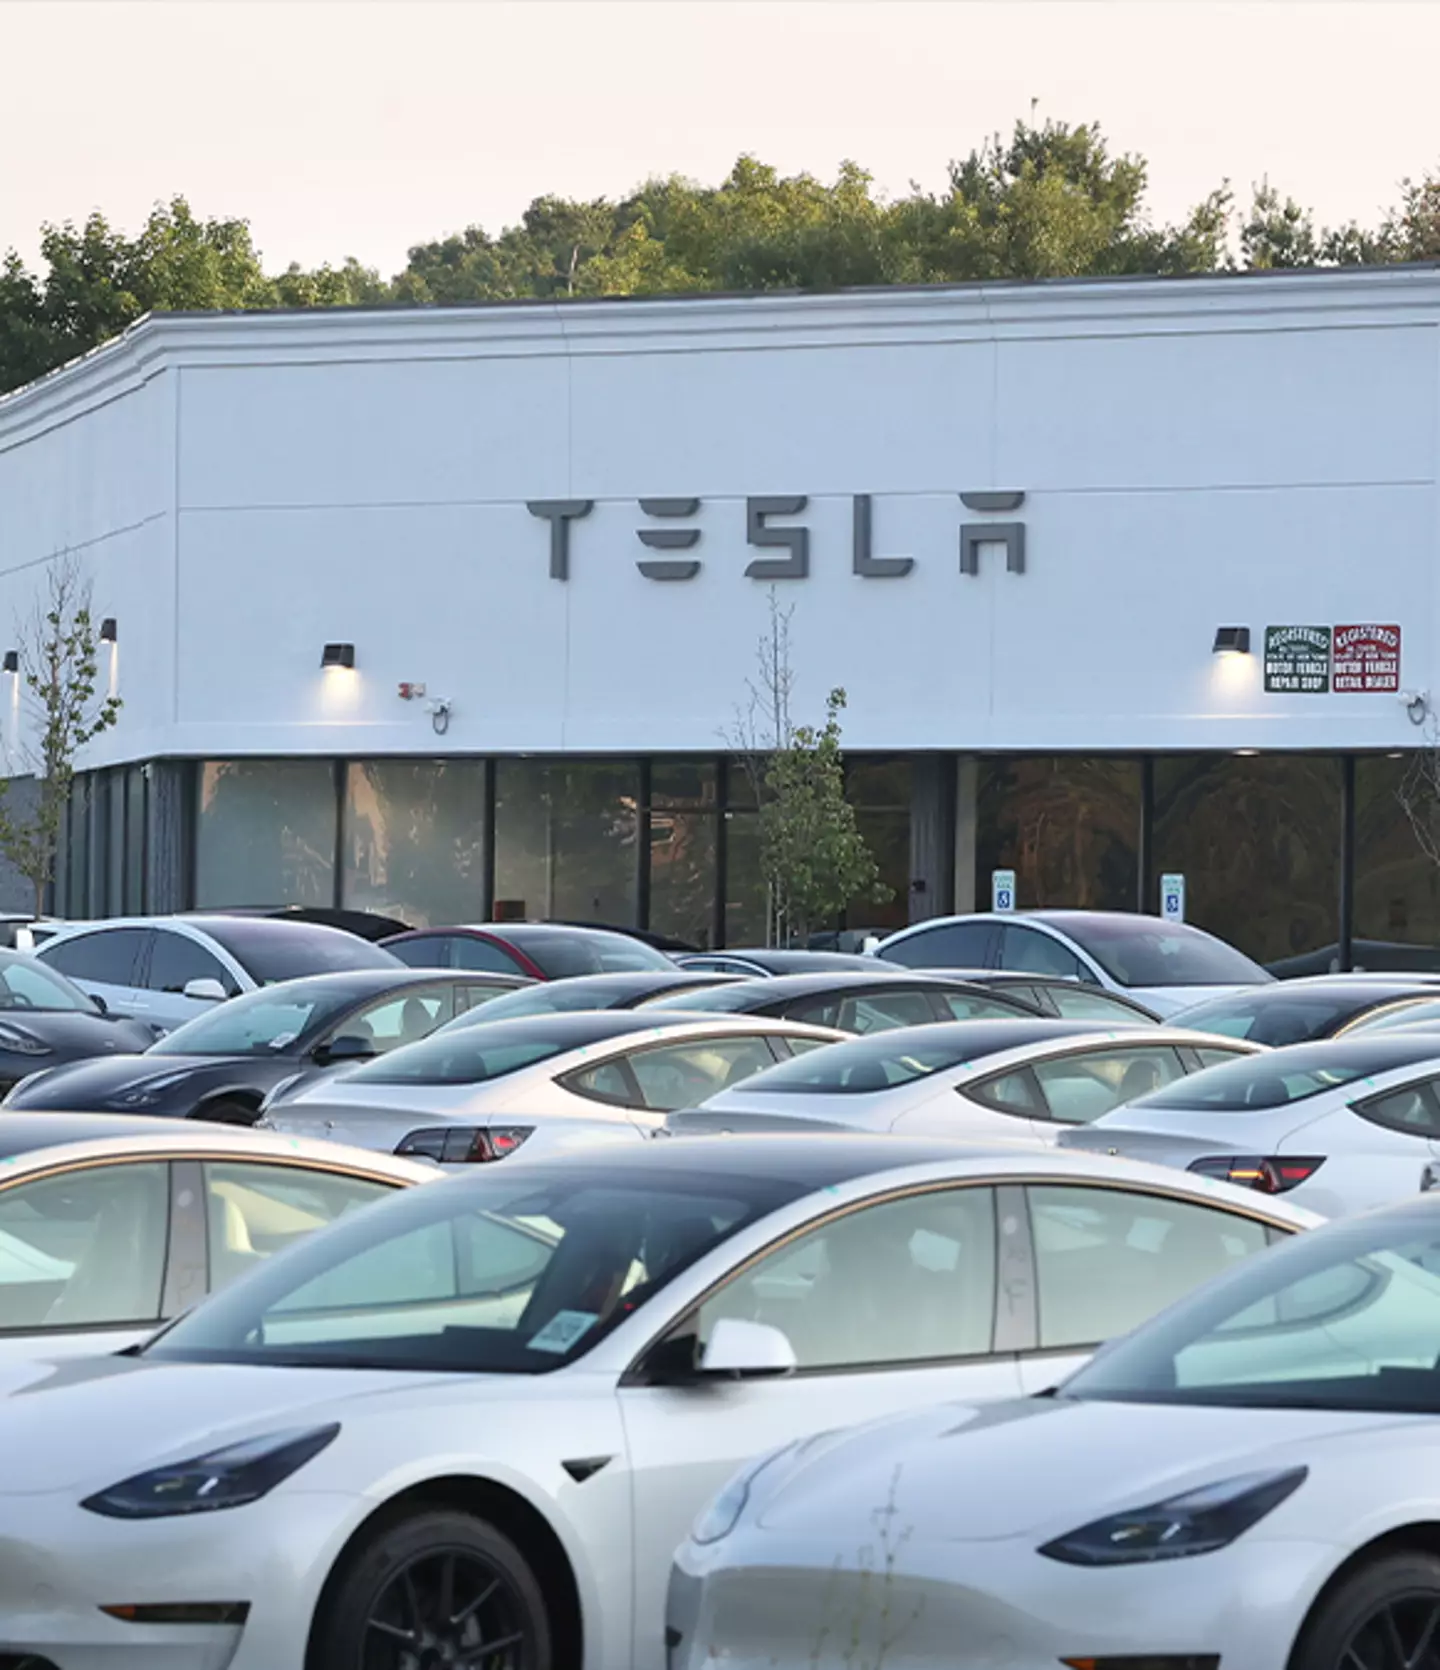 Tesla is looking to produce 10,000 units of the new model per week / Newsday LLC / Contributor / Getty